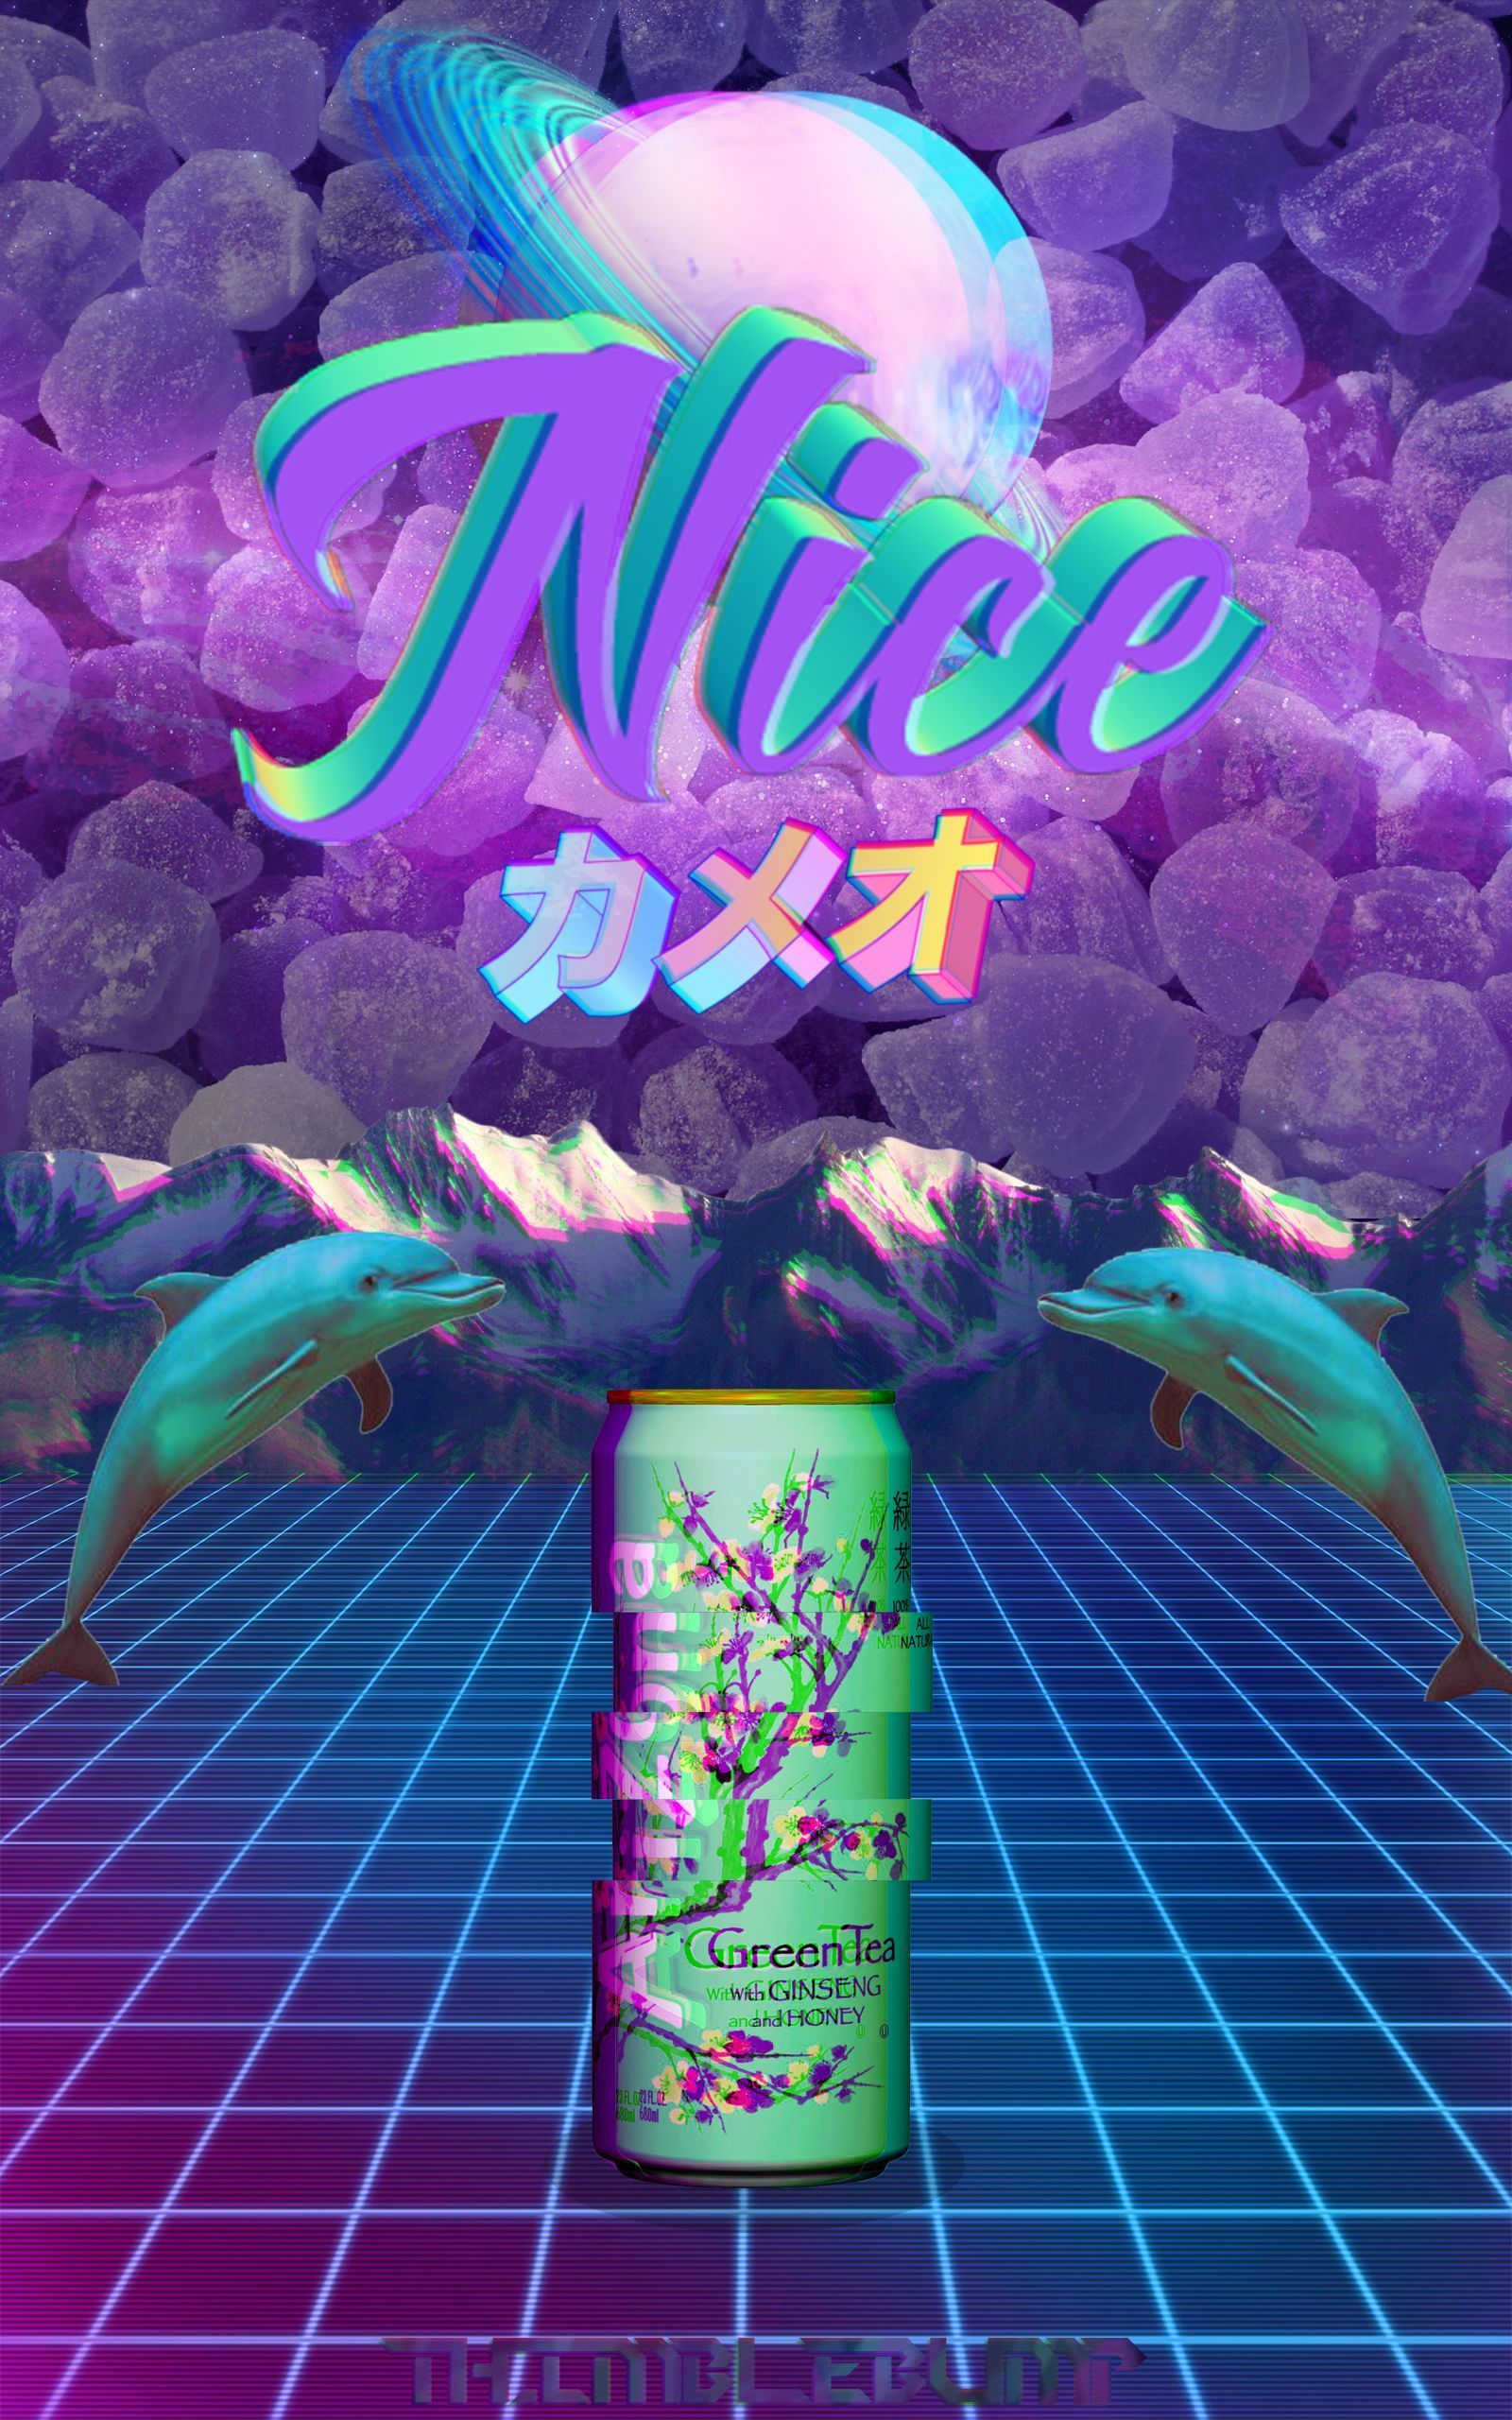 A nice poster of a can of Arizona Green Tea with dolphins and purple rocks in the background - Vaporwave, glitch